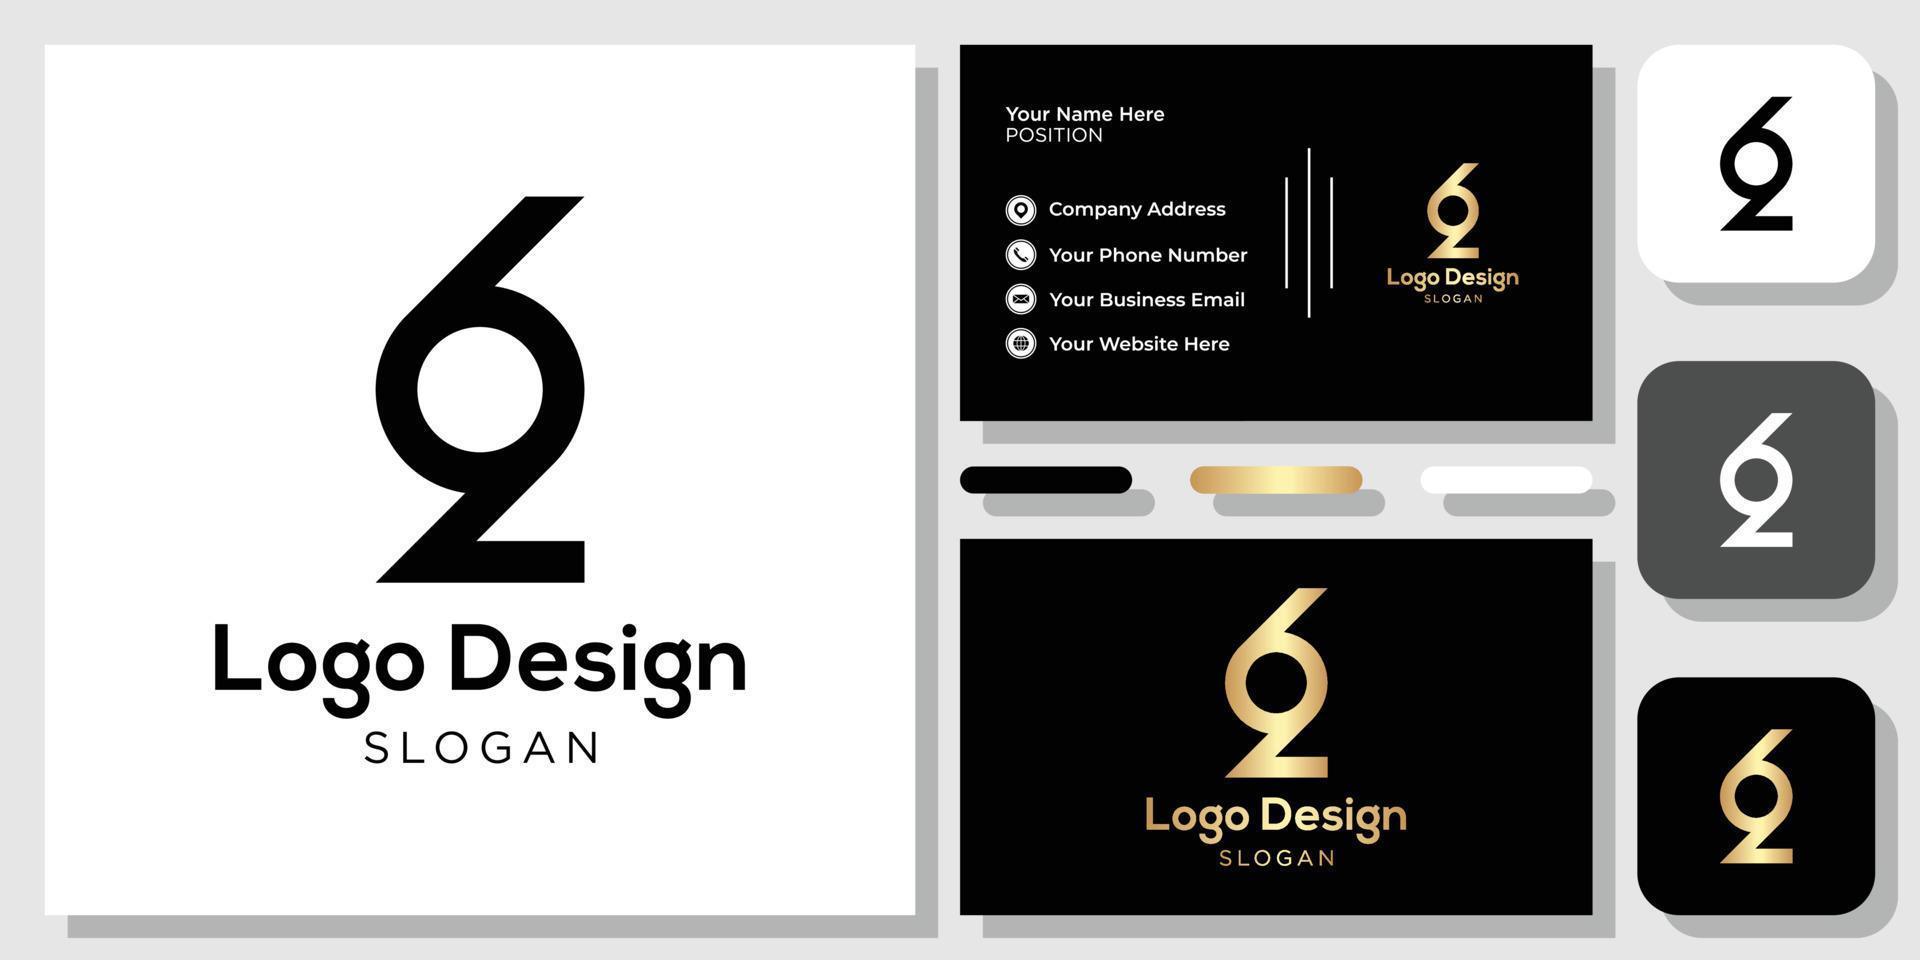 logo design number 62 black gold with business card template vector